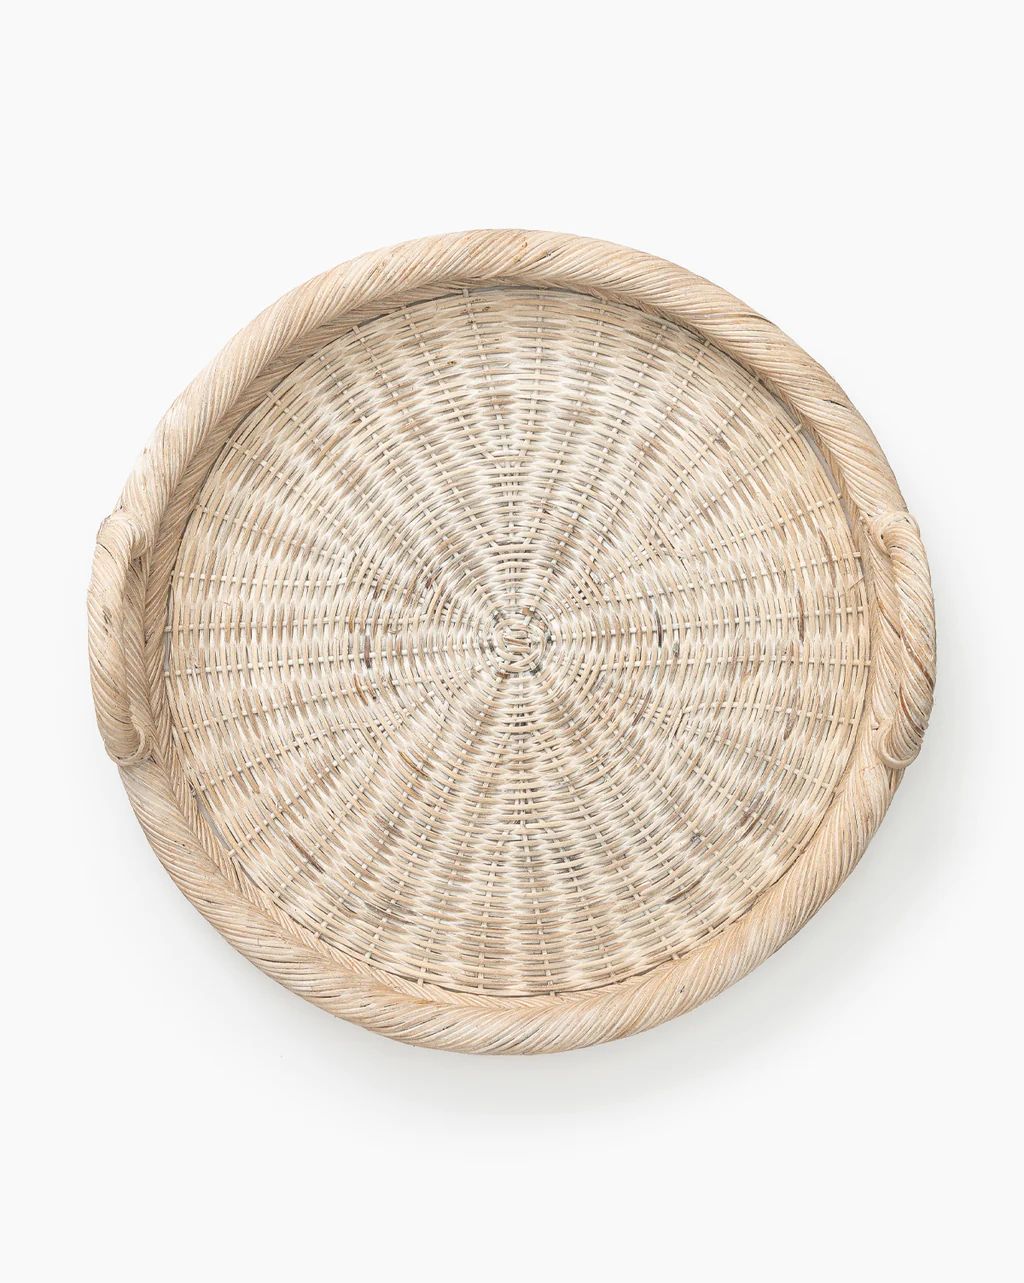 Round Wicker Tray | McGee & Co.